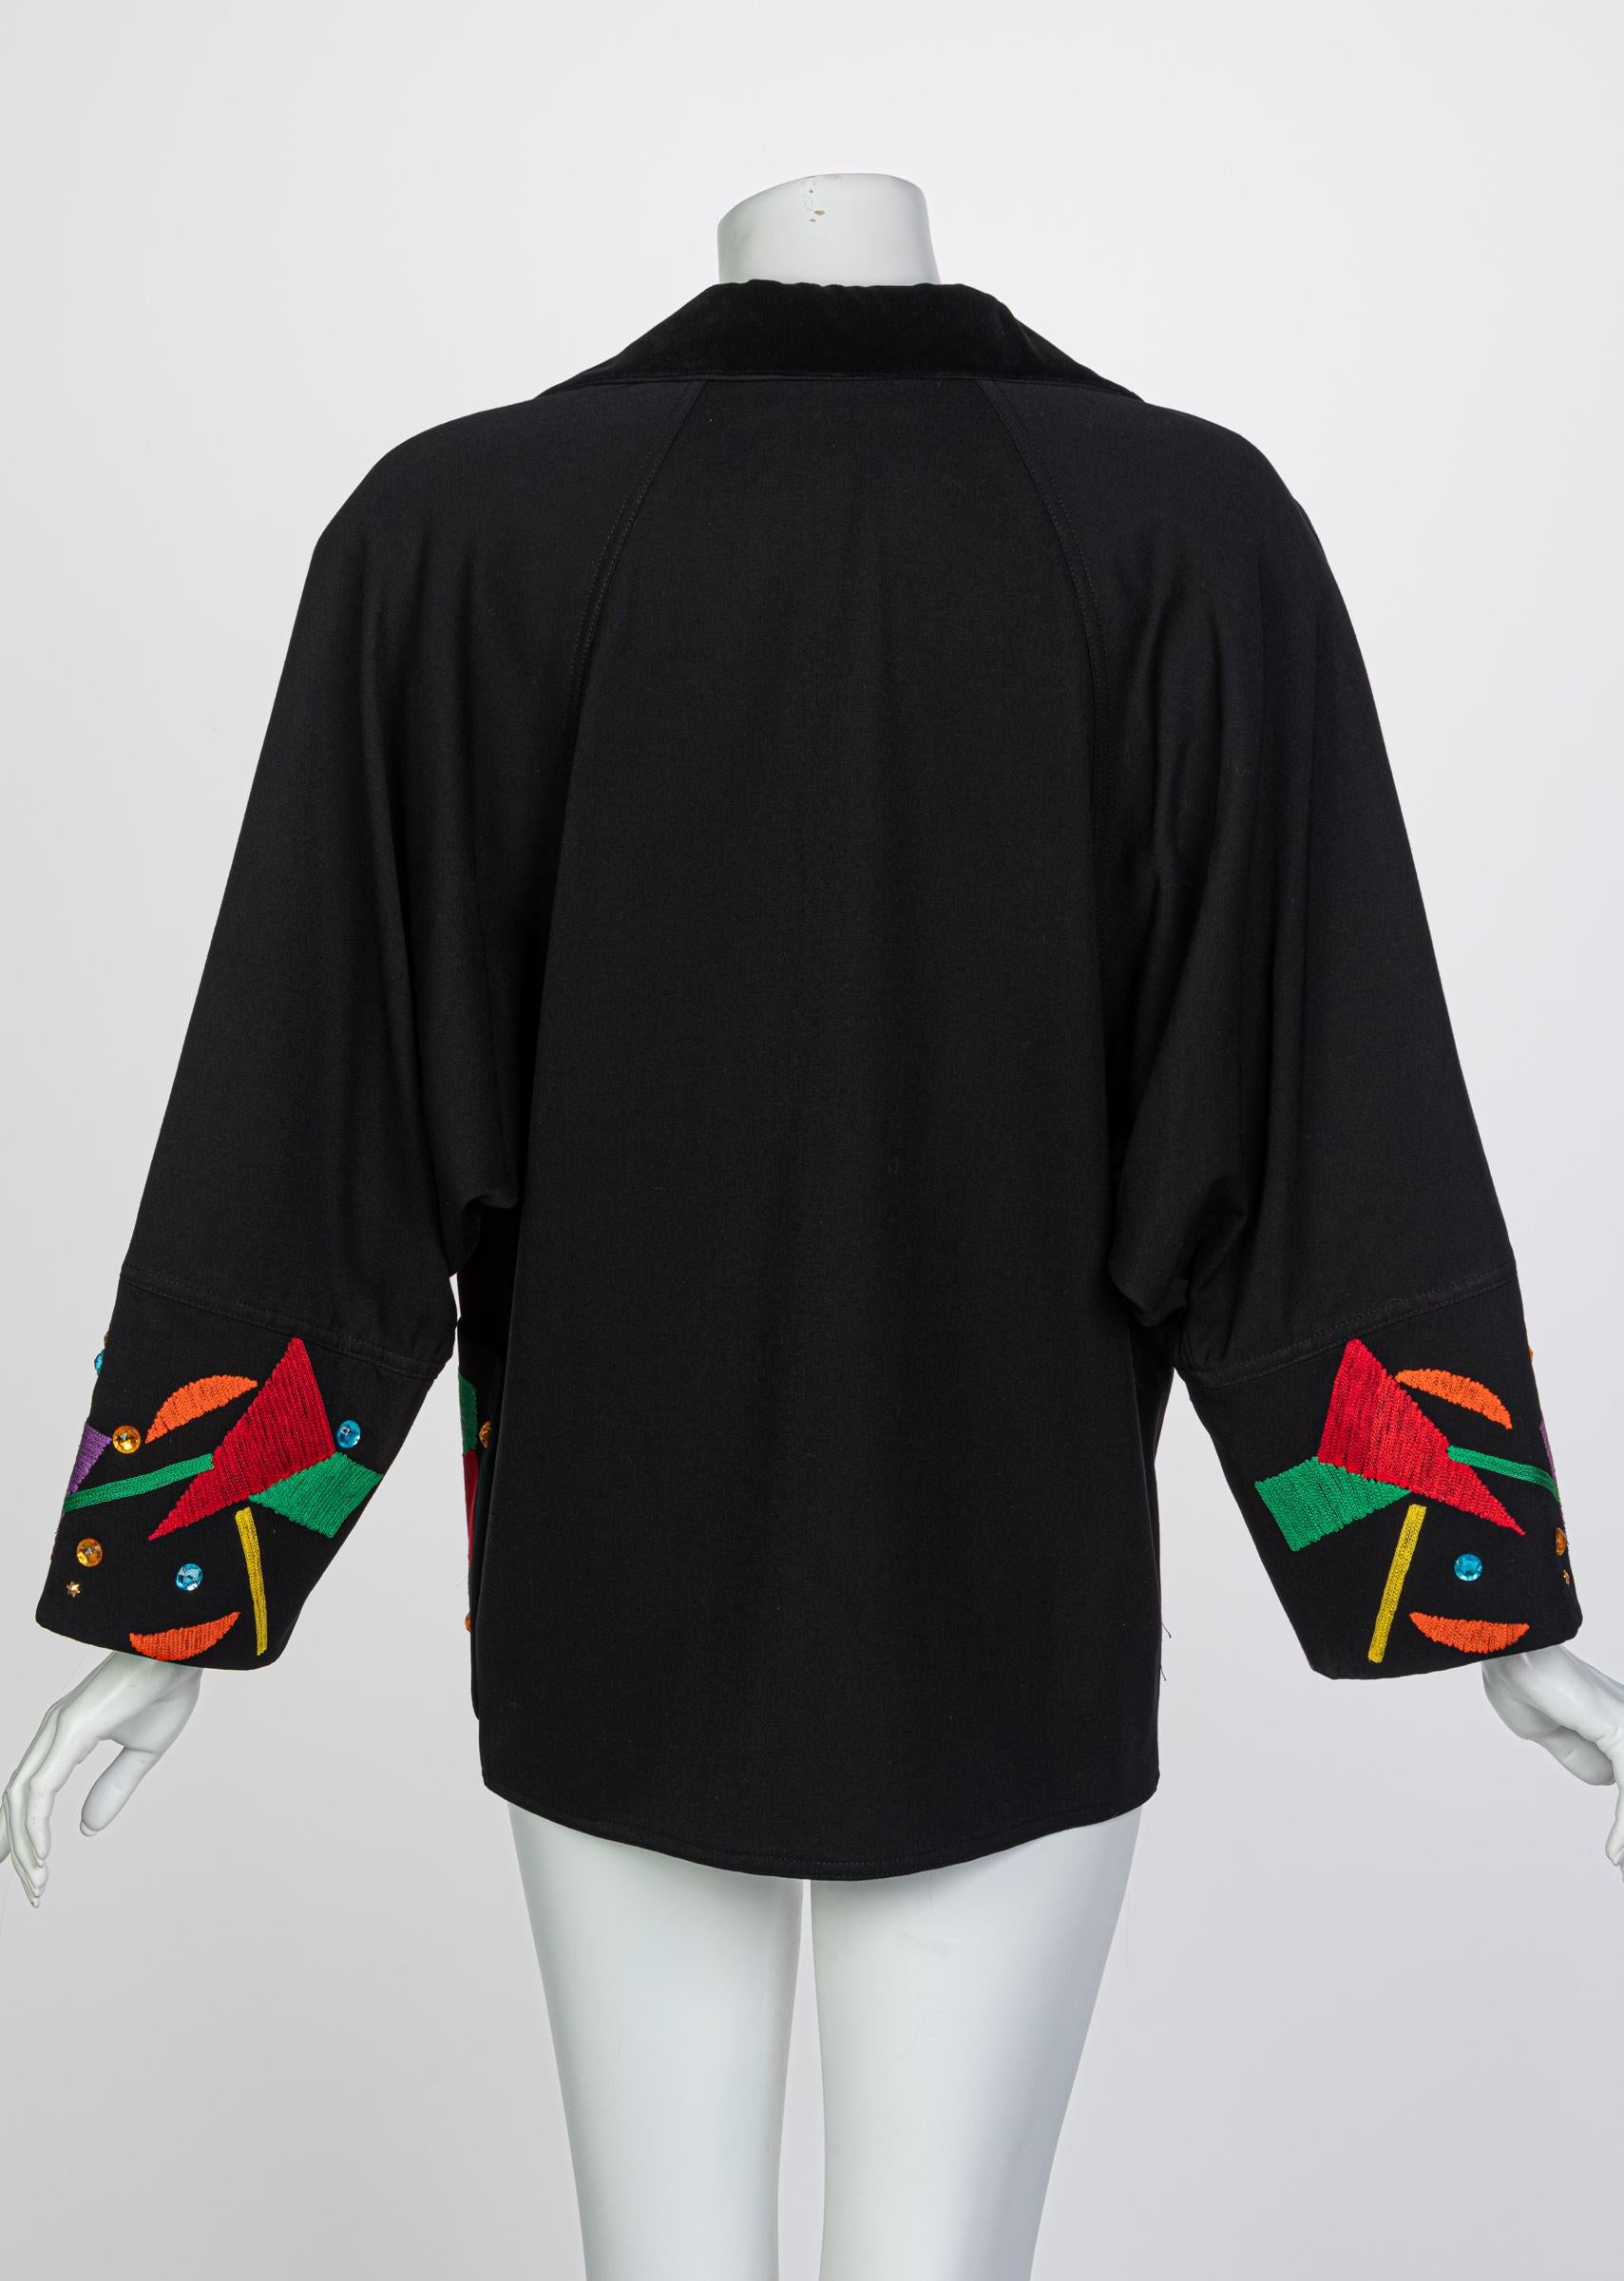 Chloe Karl Lagerfeld Black Colorful Memphis Embroidered Jacket , 1980s 1